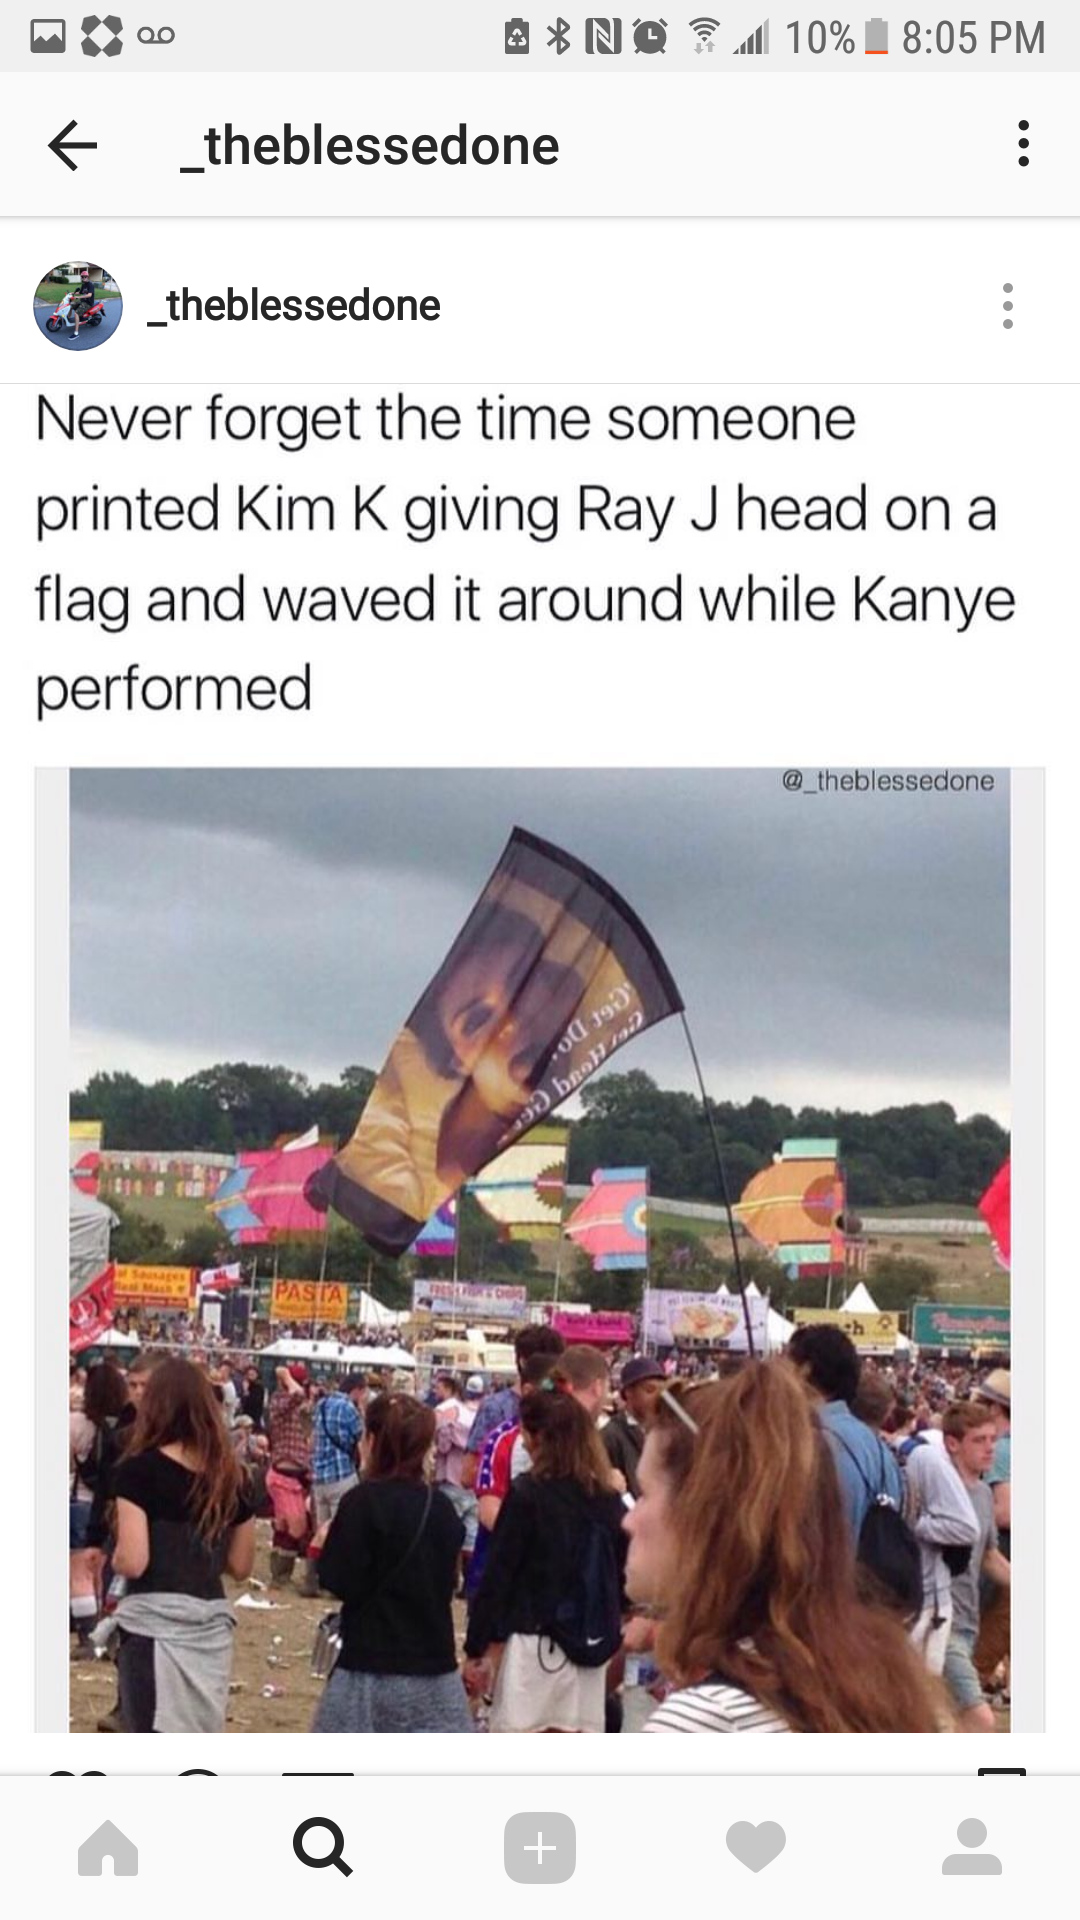 memes - kim k giving ray j head - 10% _theblessedone _theblessedone Never forget the time someone printed Kim K giving Ray J head on a flag and waved it around while Kanye performed tablete